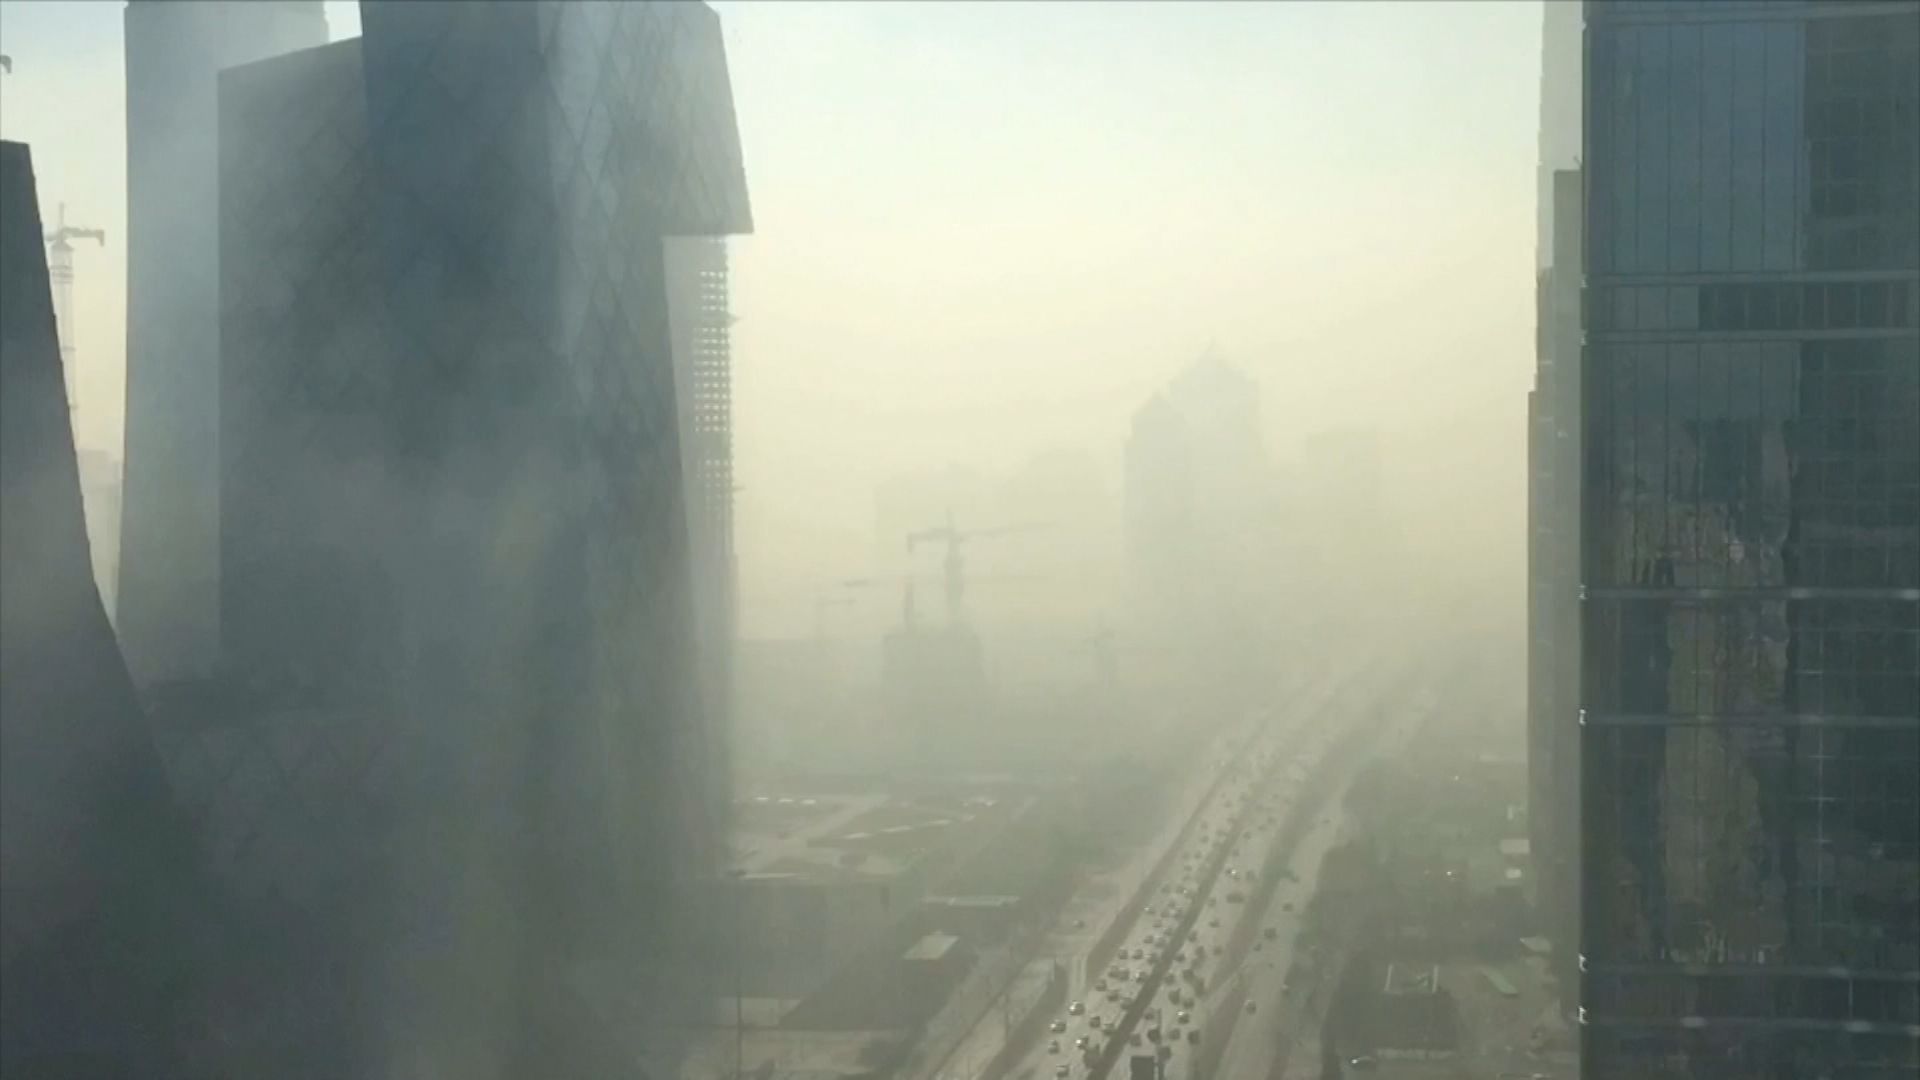 How the internet is powering the fight against Beijing's dirty air, Pollution